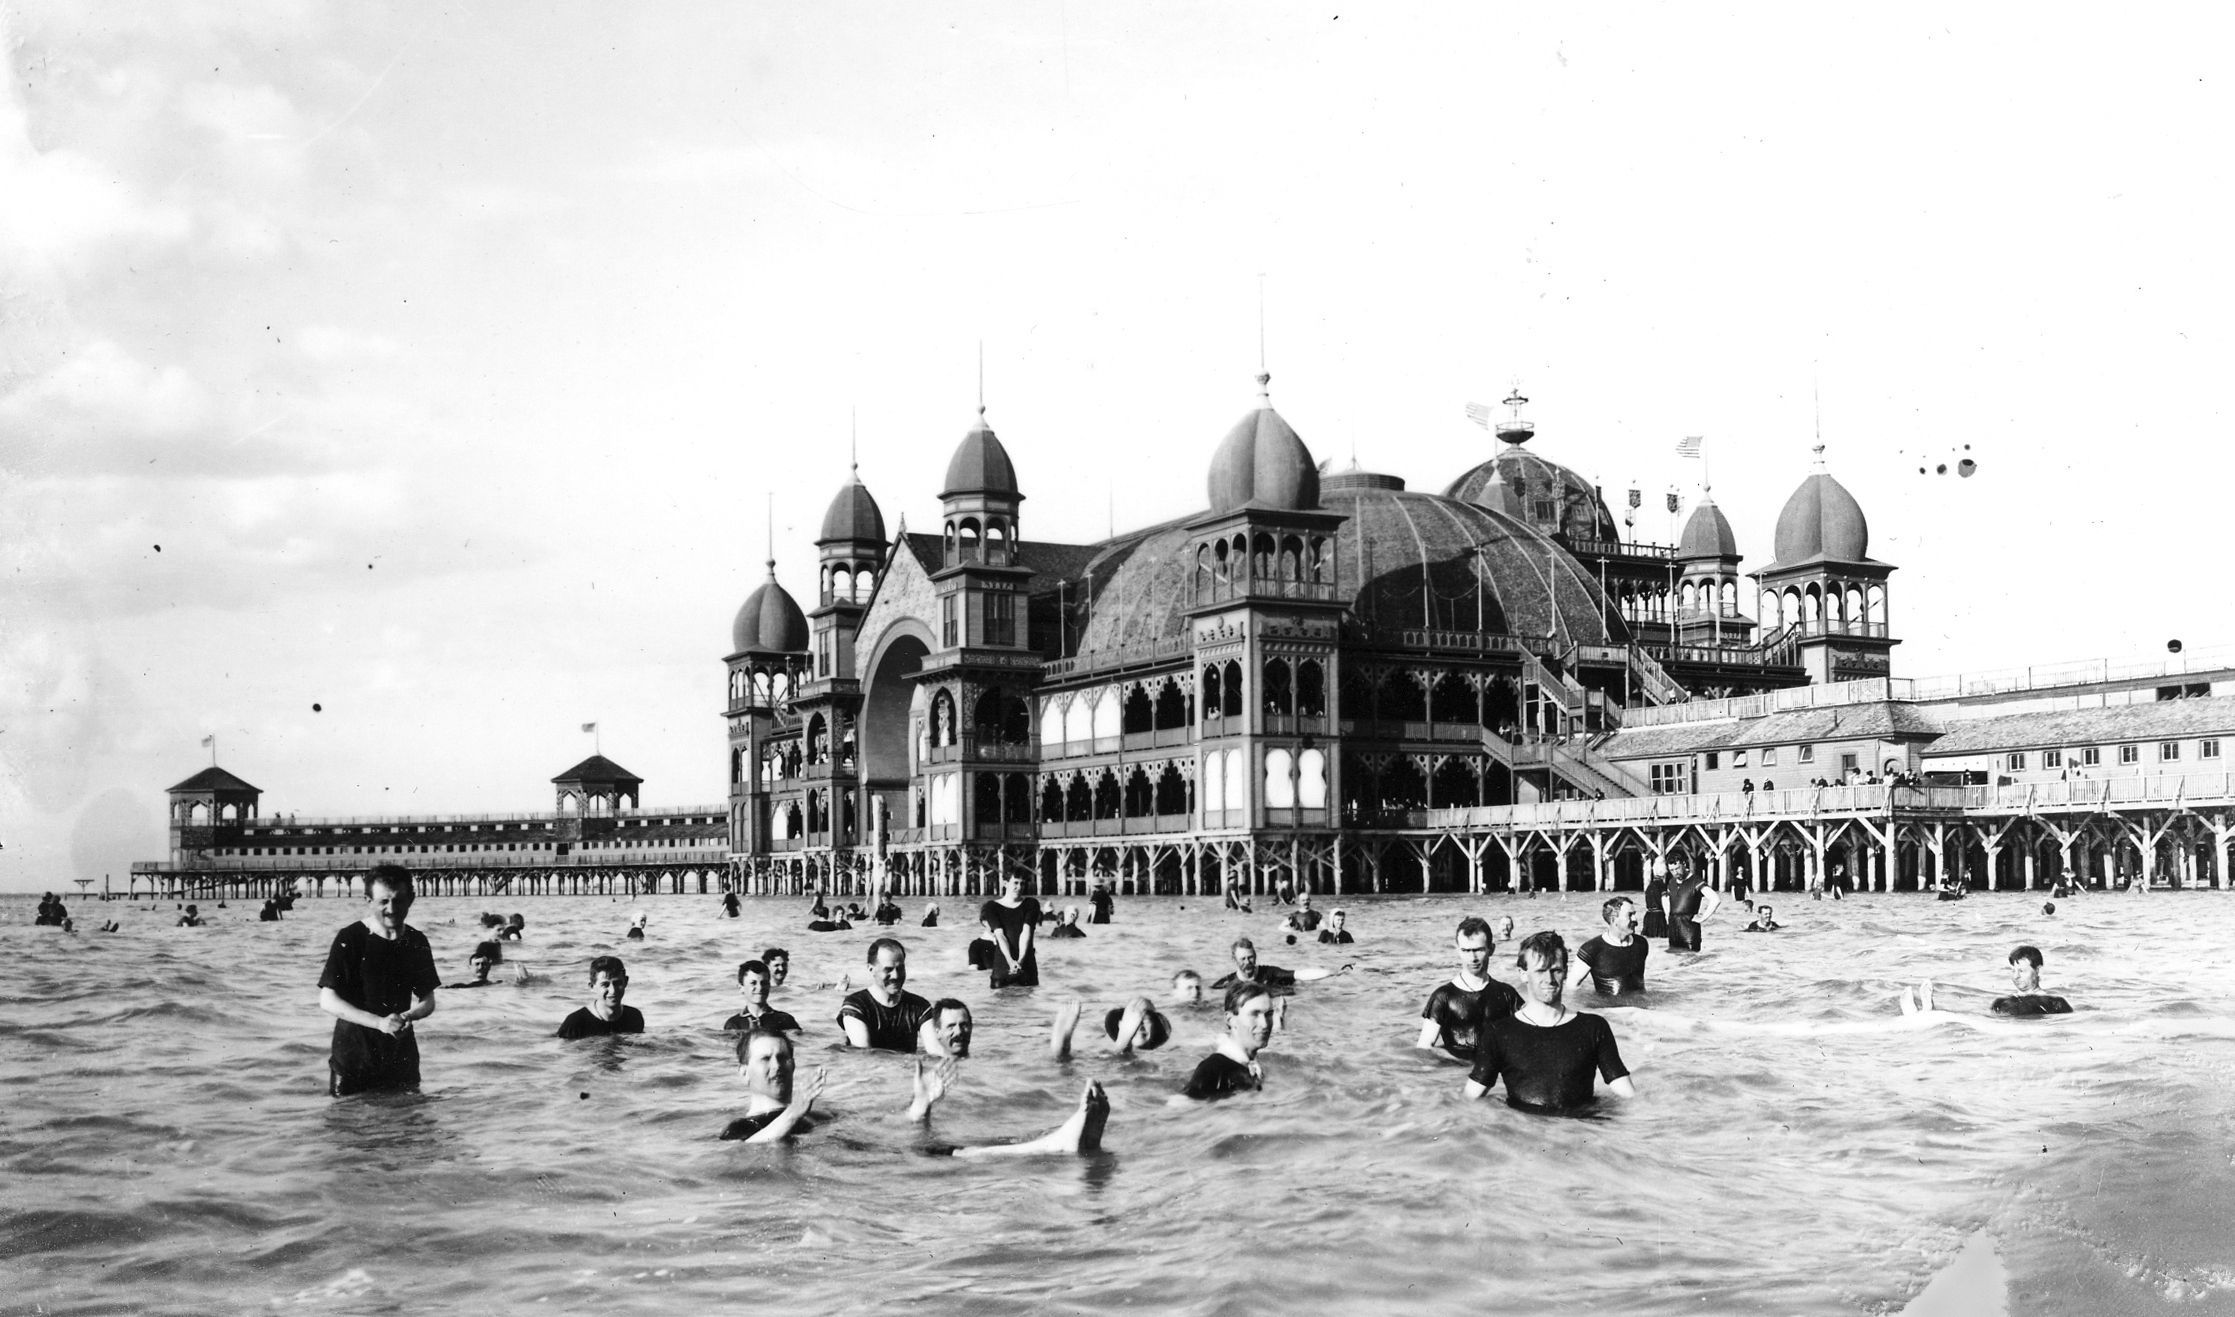 A vintage black-and-white photograph of people swimming at the Saltair resort in Utah, along the Great Salt Lake, in 1933.